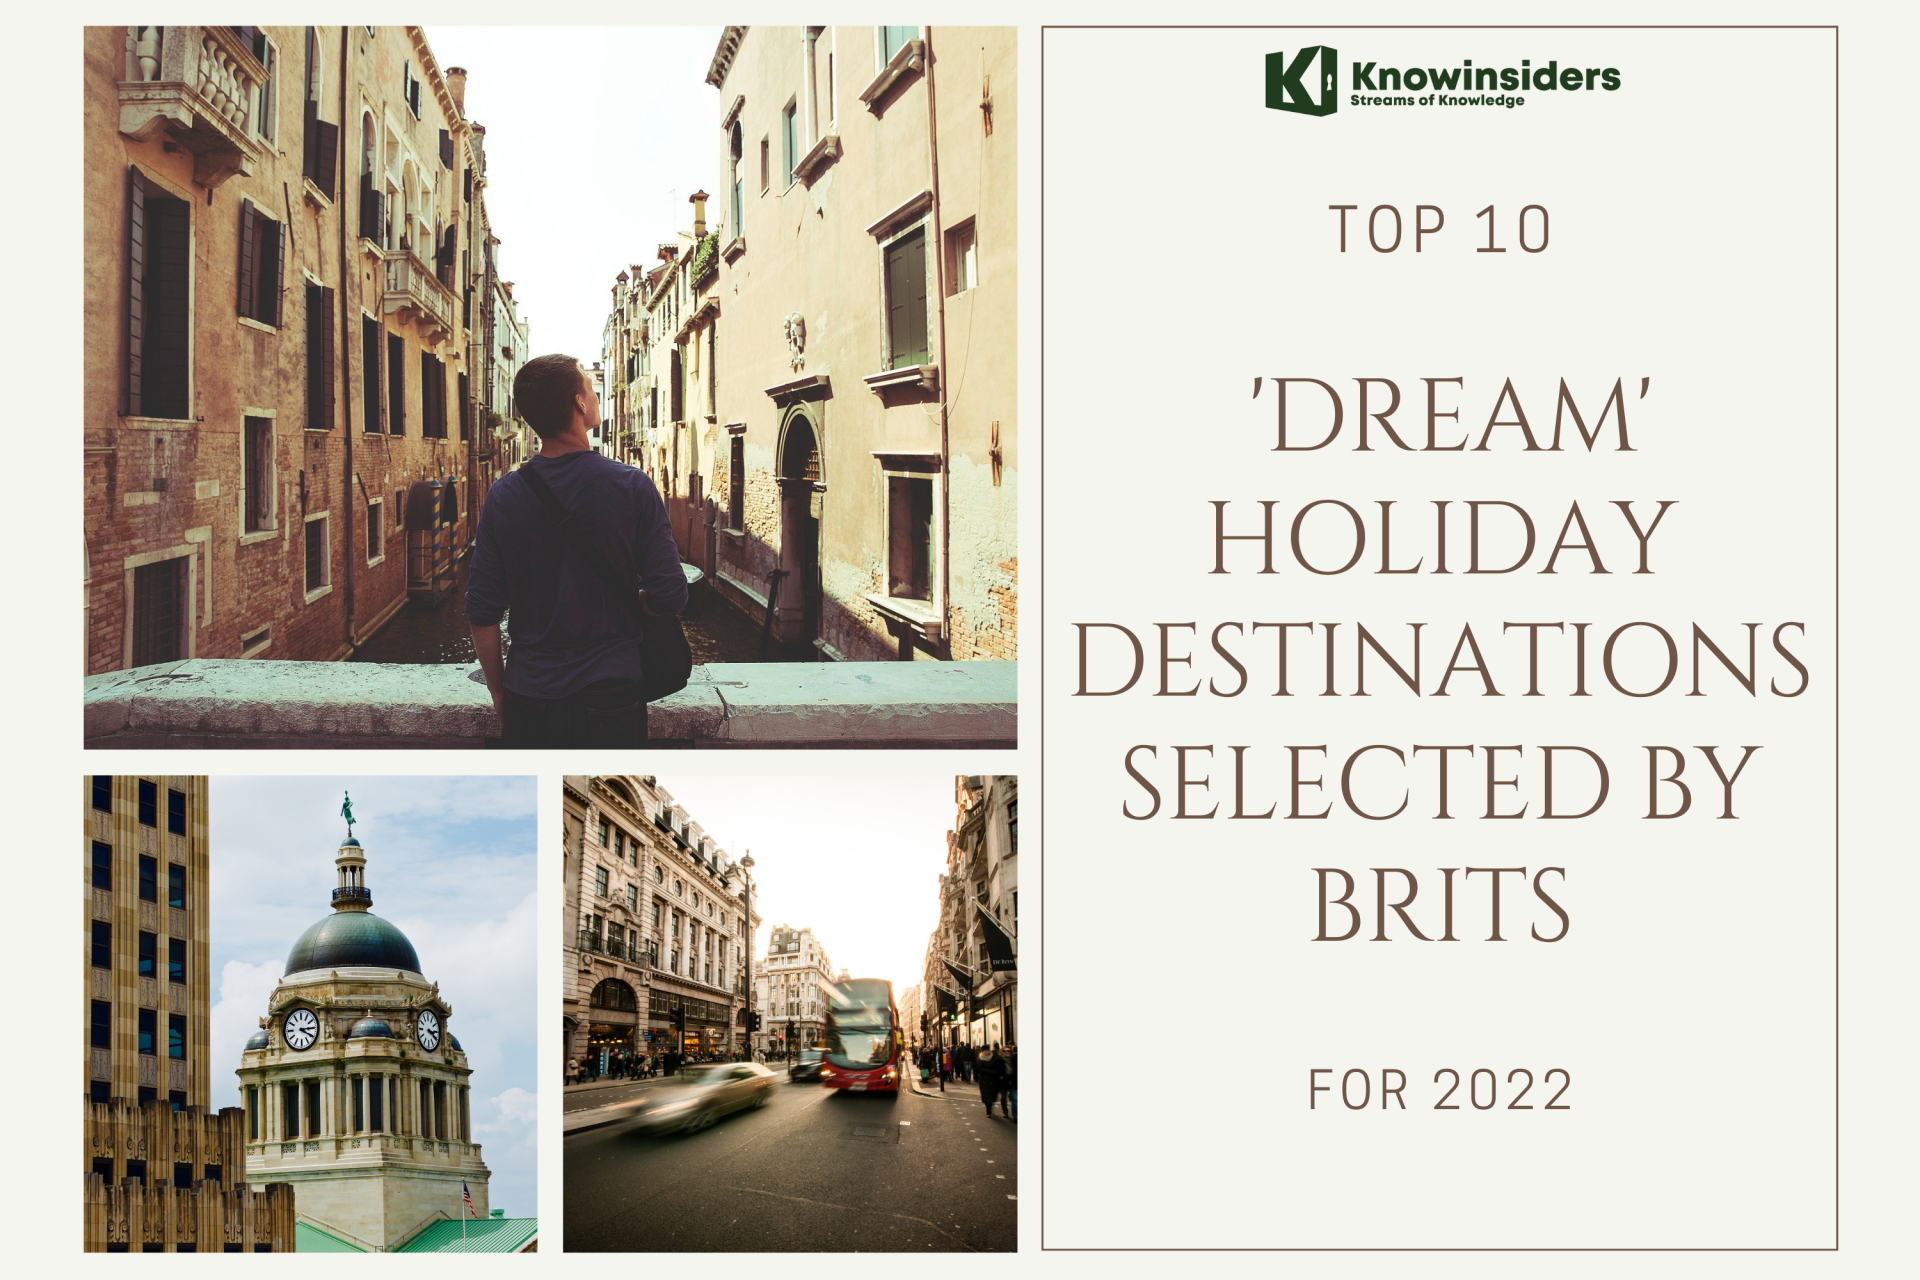 Top 10 ‘Dream’ Holiday Destinations Selected By Brits For 2022